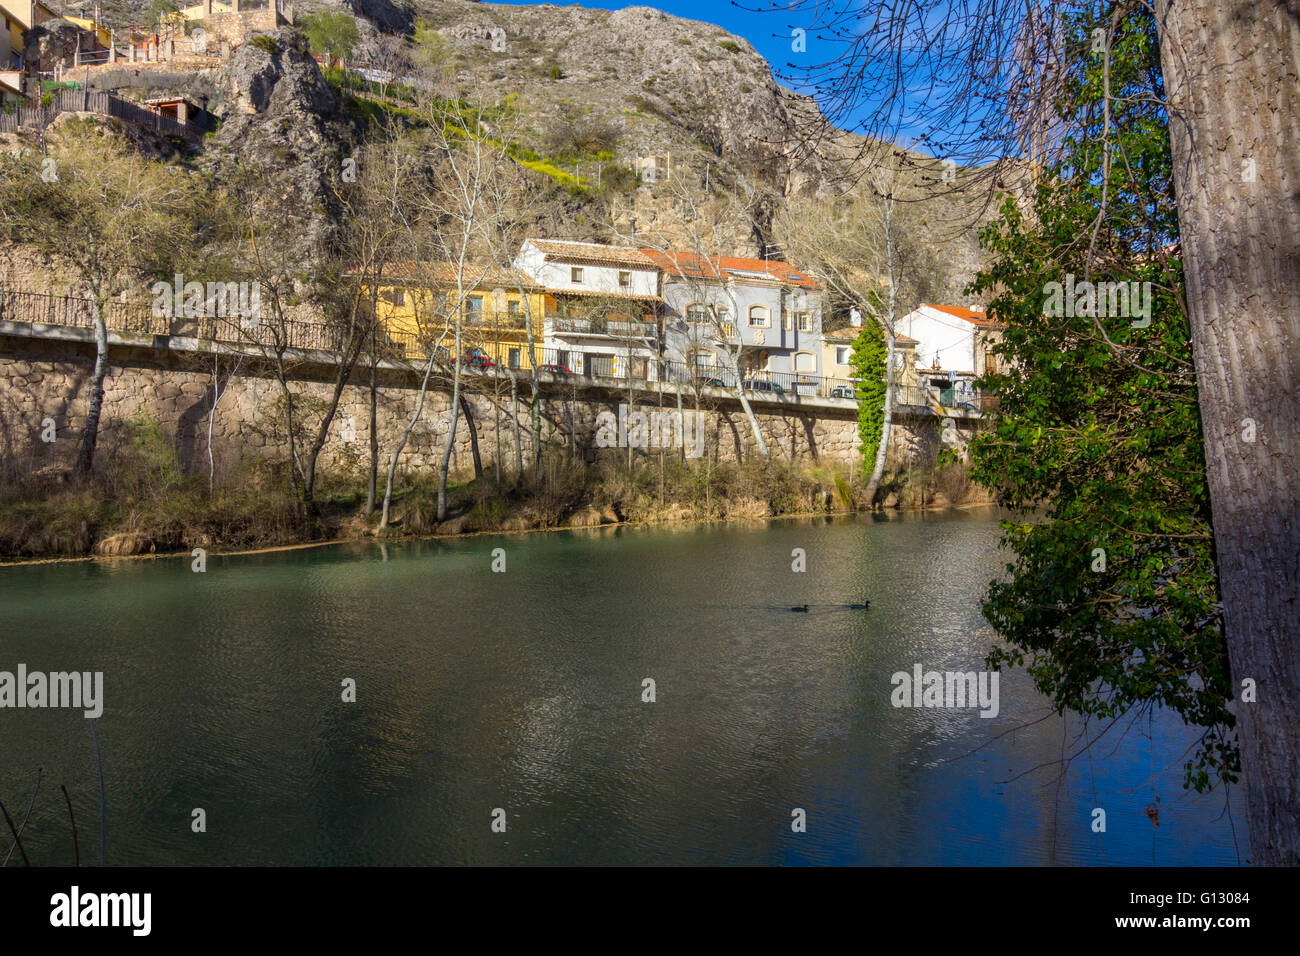 Jucar river crossing the city of Cuenca, Spain Stock Photo